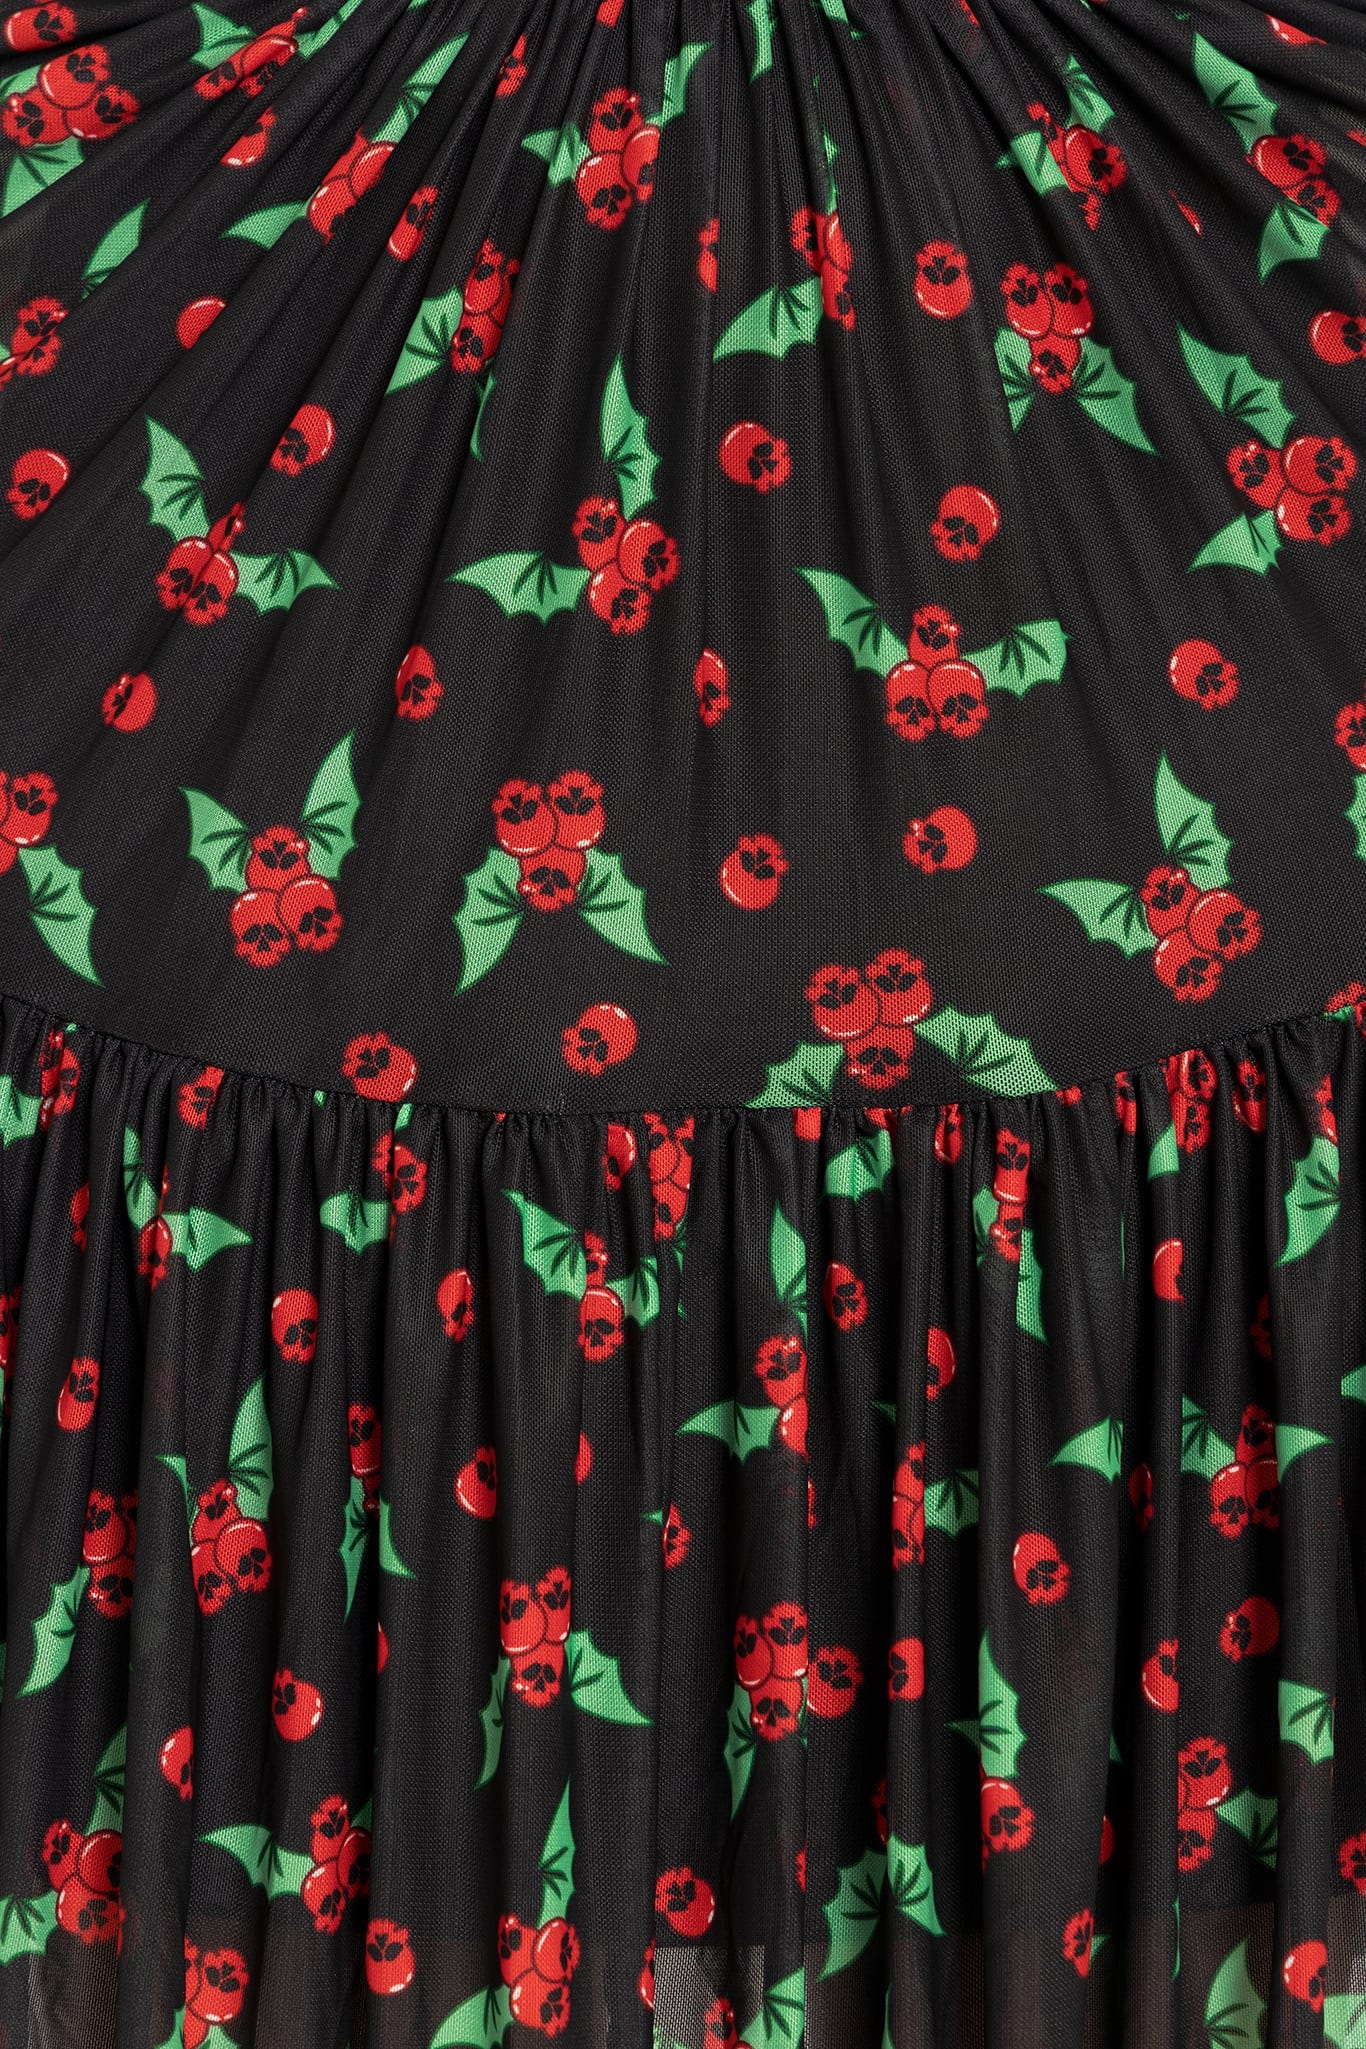 Hell Holly Festive Dress - Limited